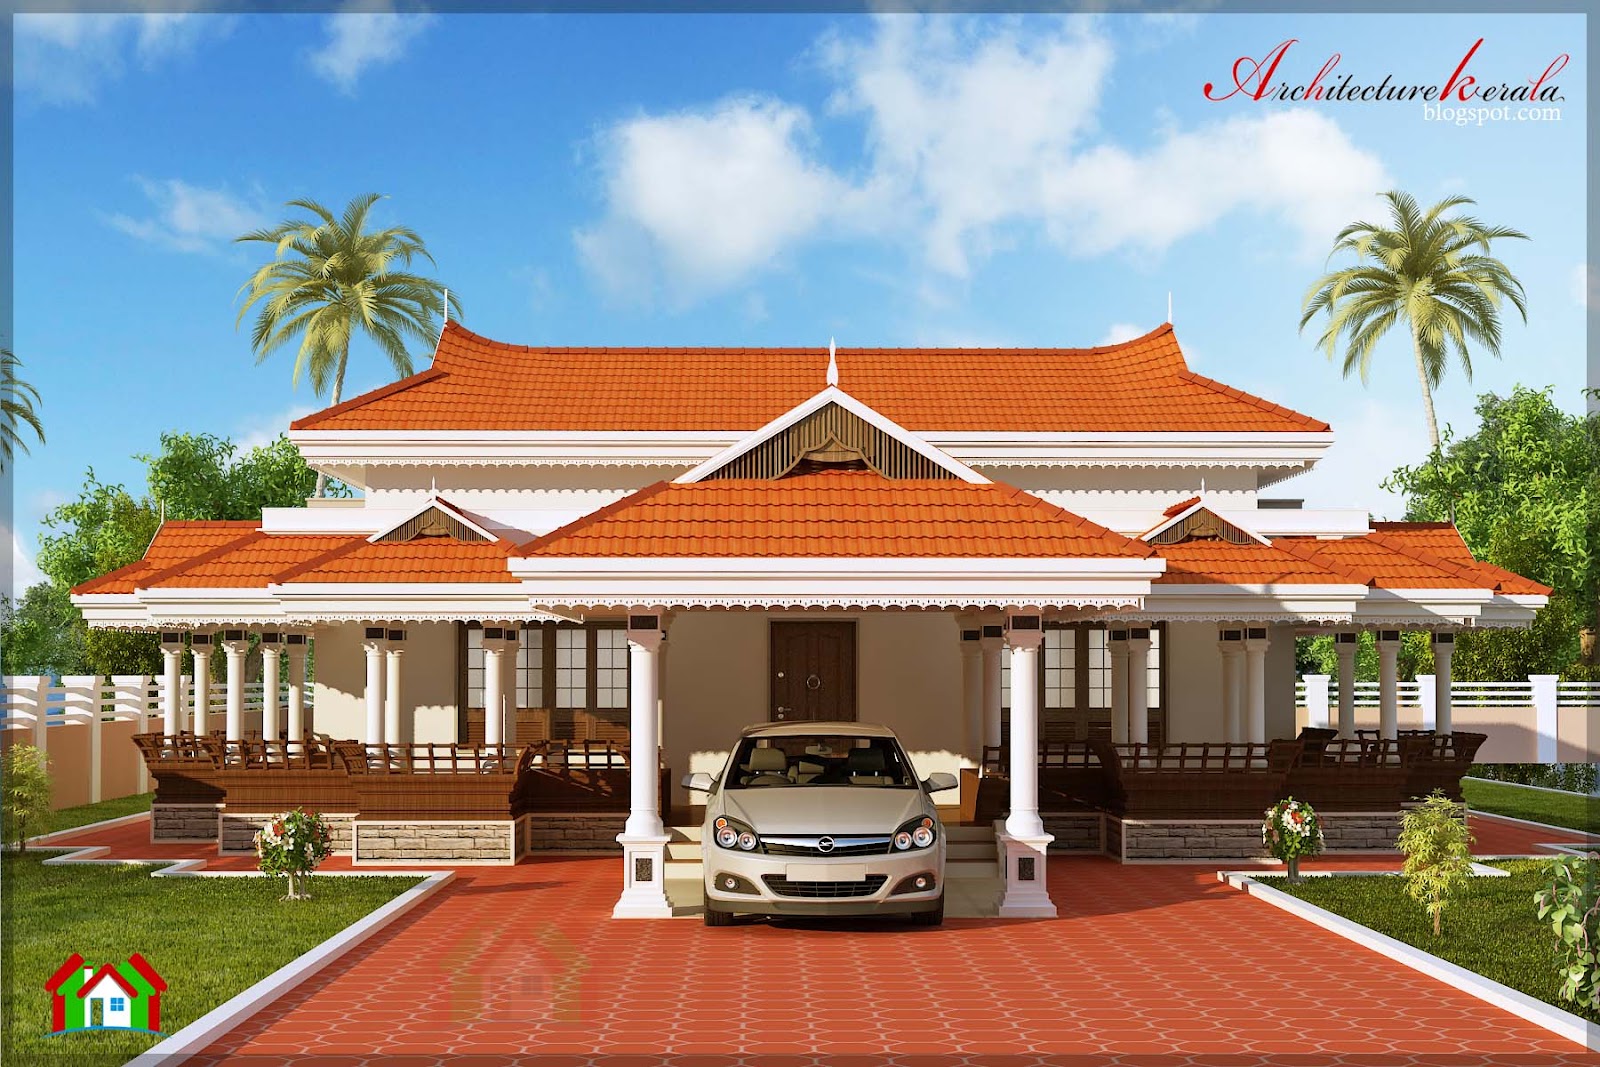 Architecture Kerala: 3 BHK IN SINGLE FLOOR HOUSE ELEVATION